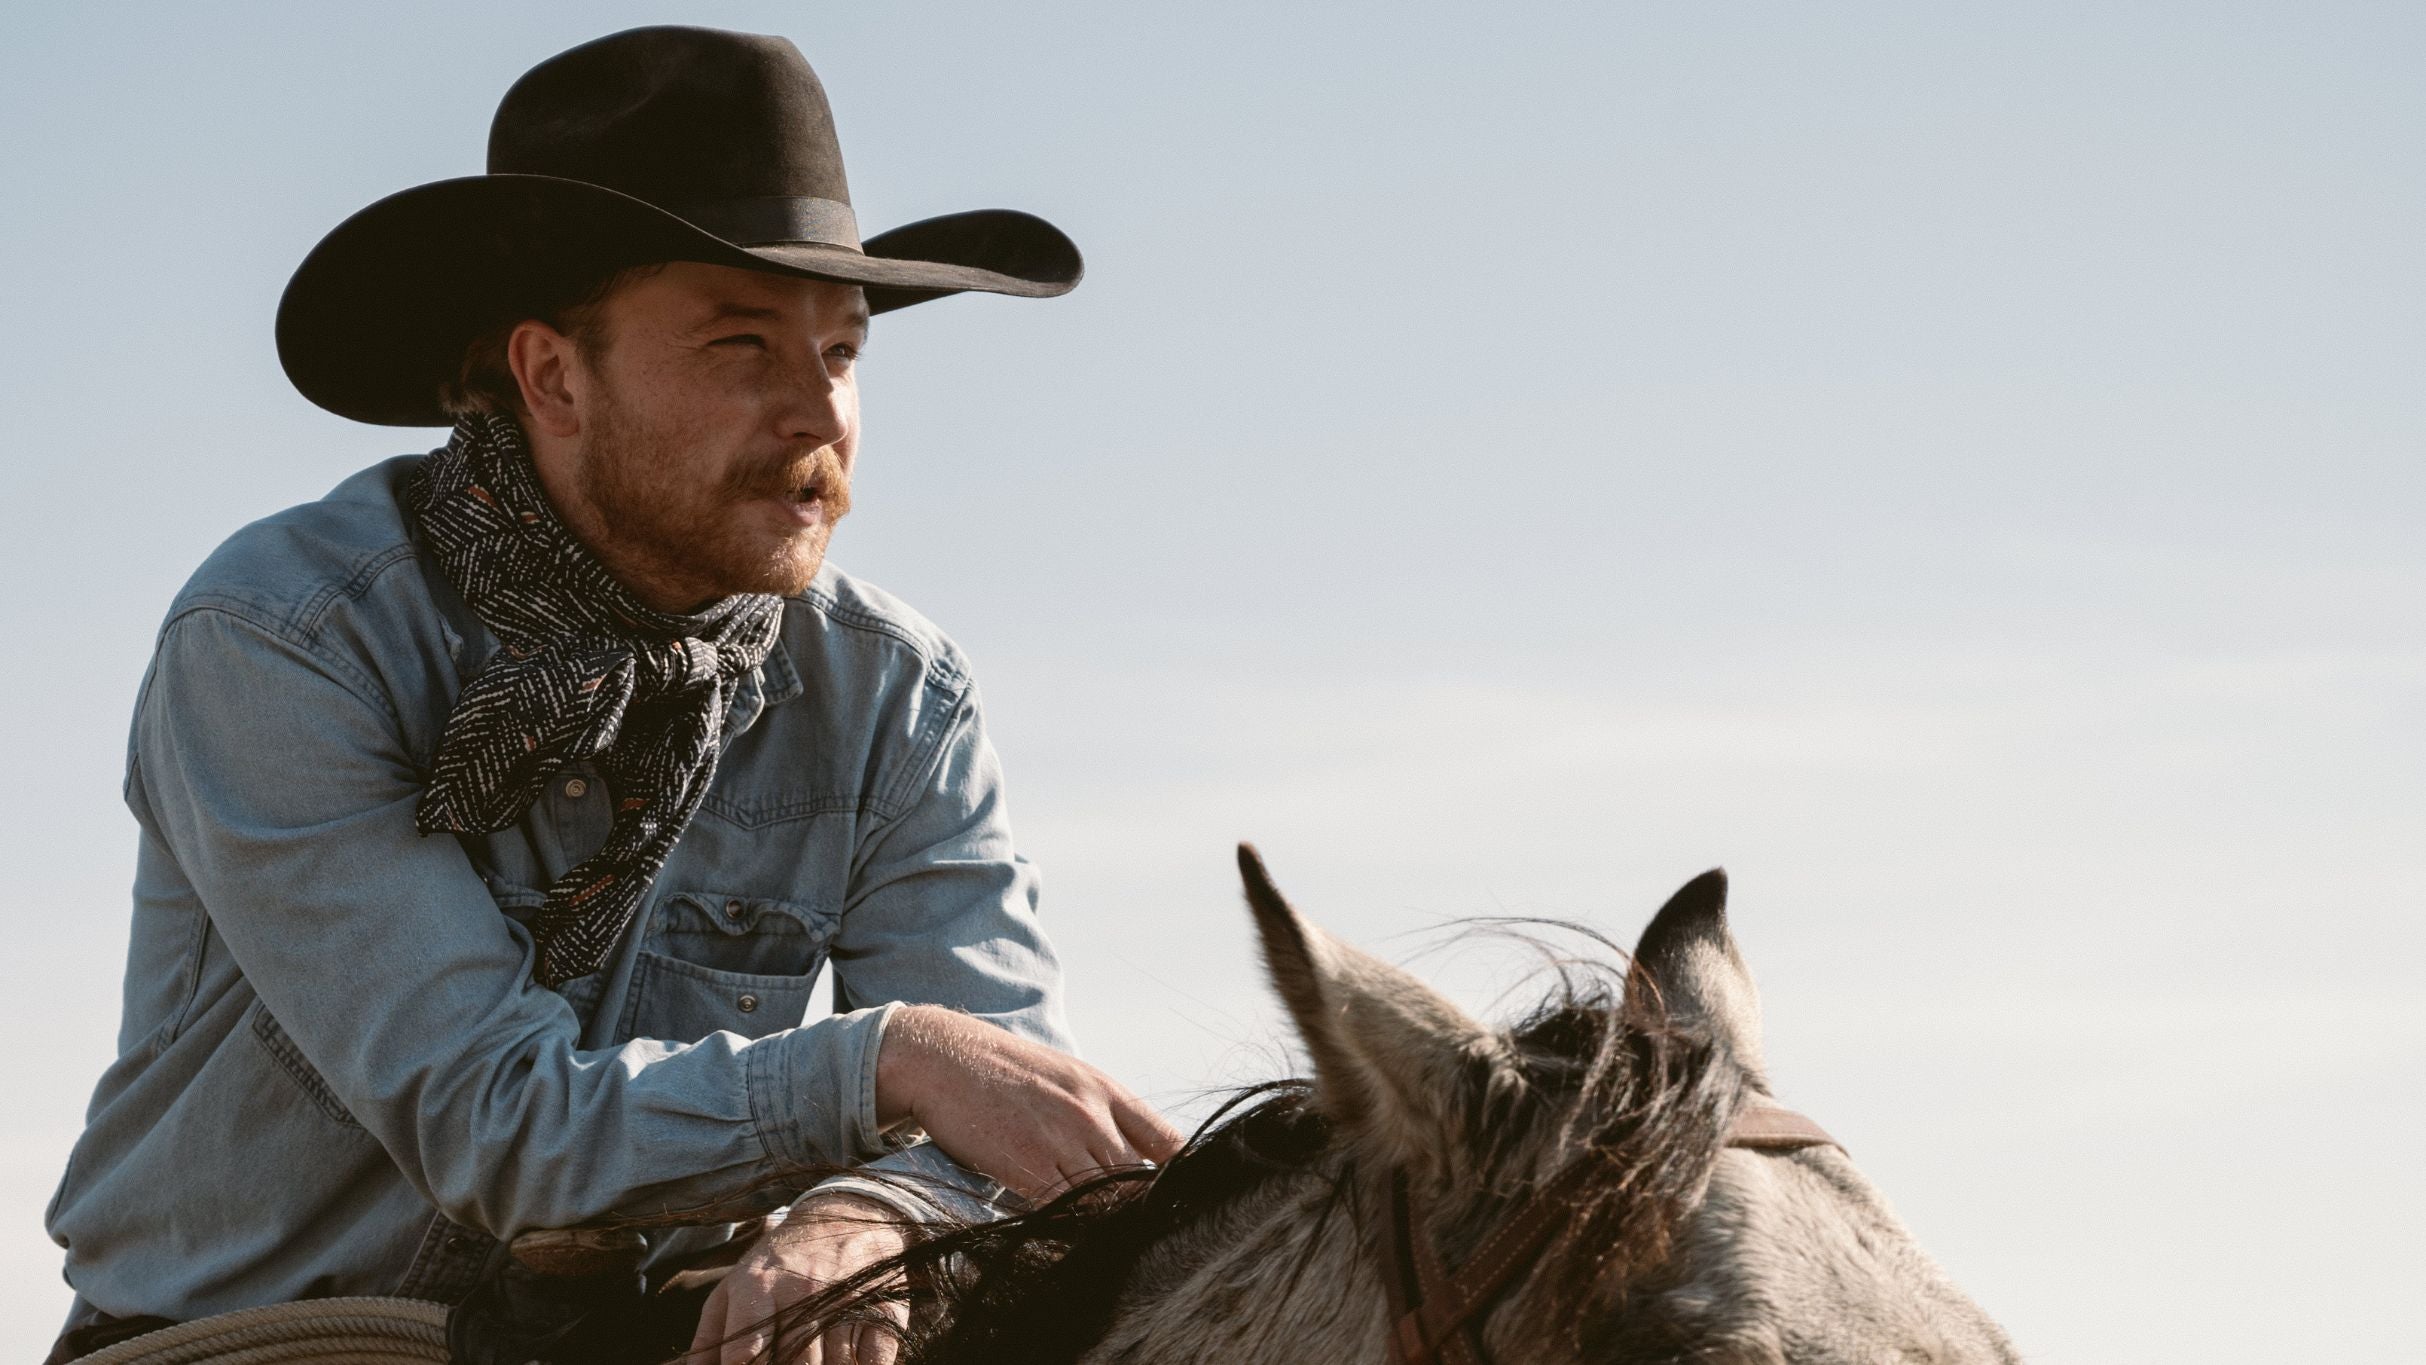 working presale code for Colter Wall tickets in Durant at Choctaw Grand Theater